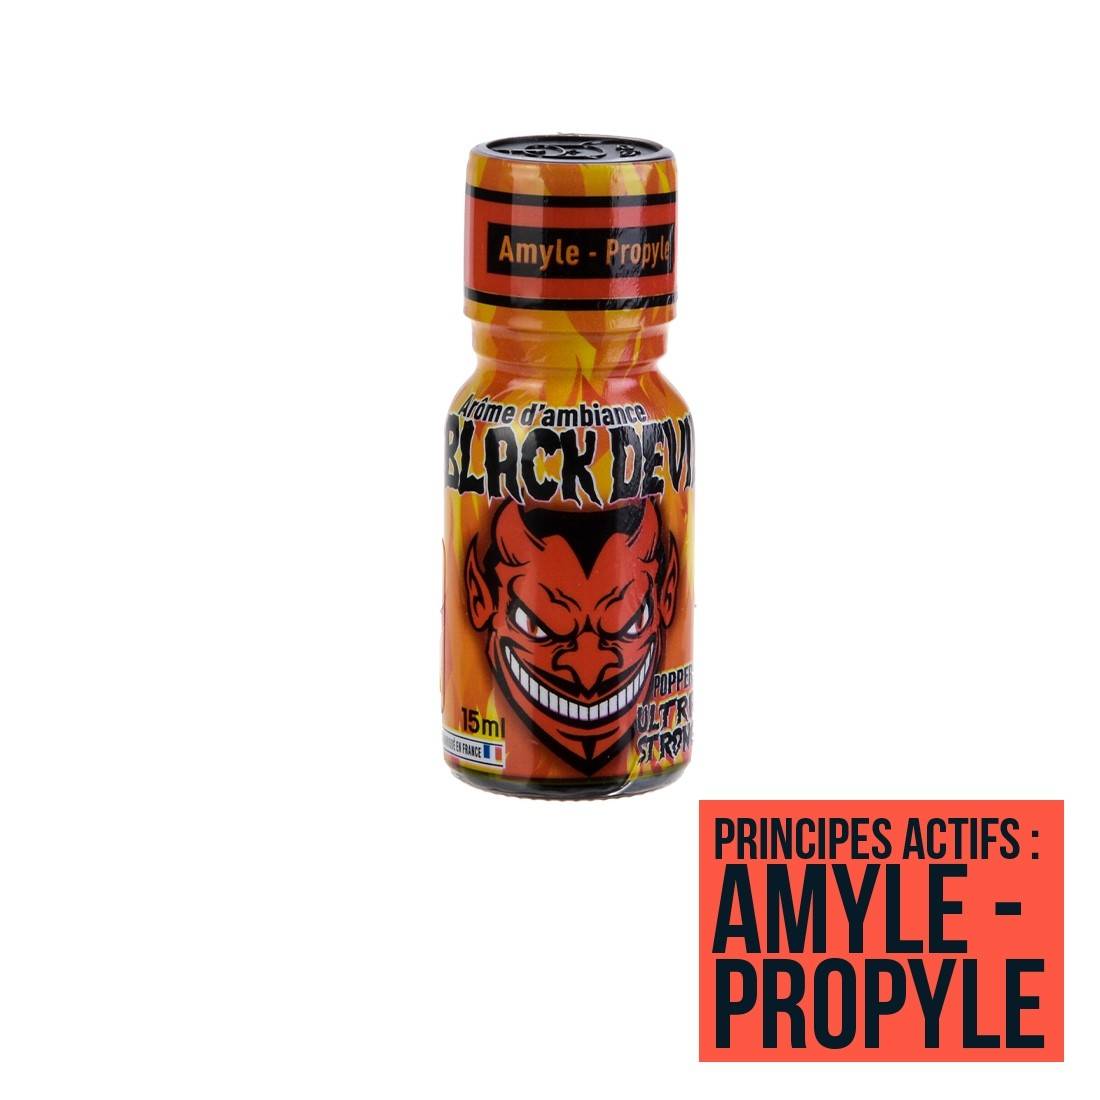 Poppers Amsterdam 13ml; disponible sur S Factory !